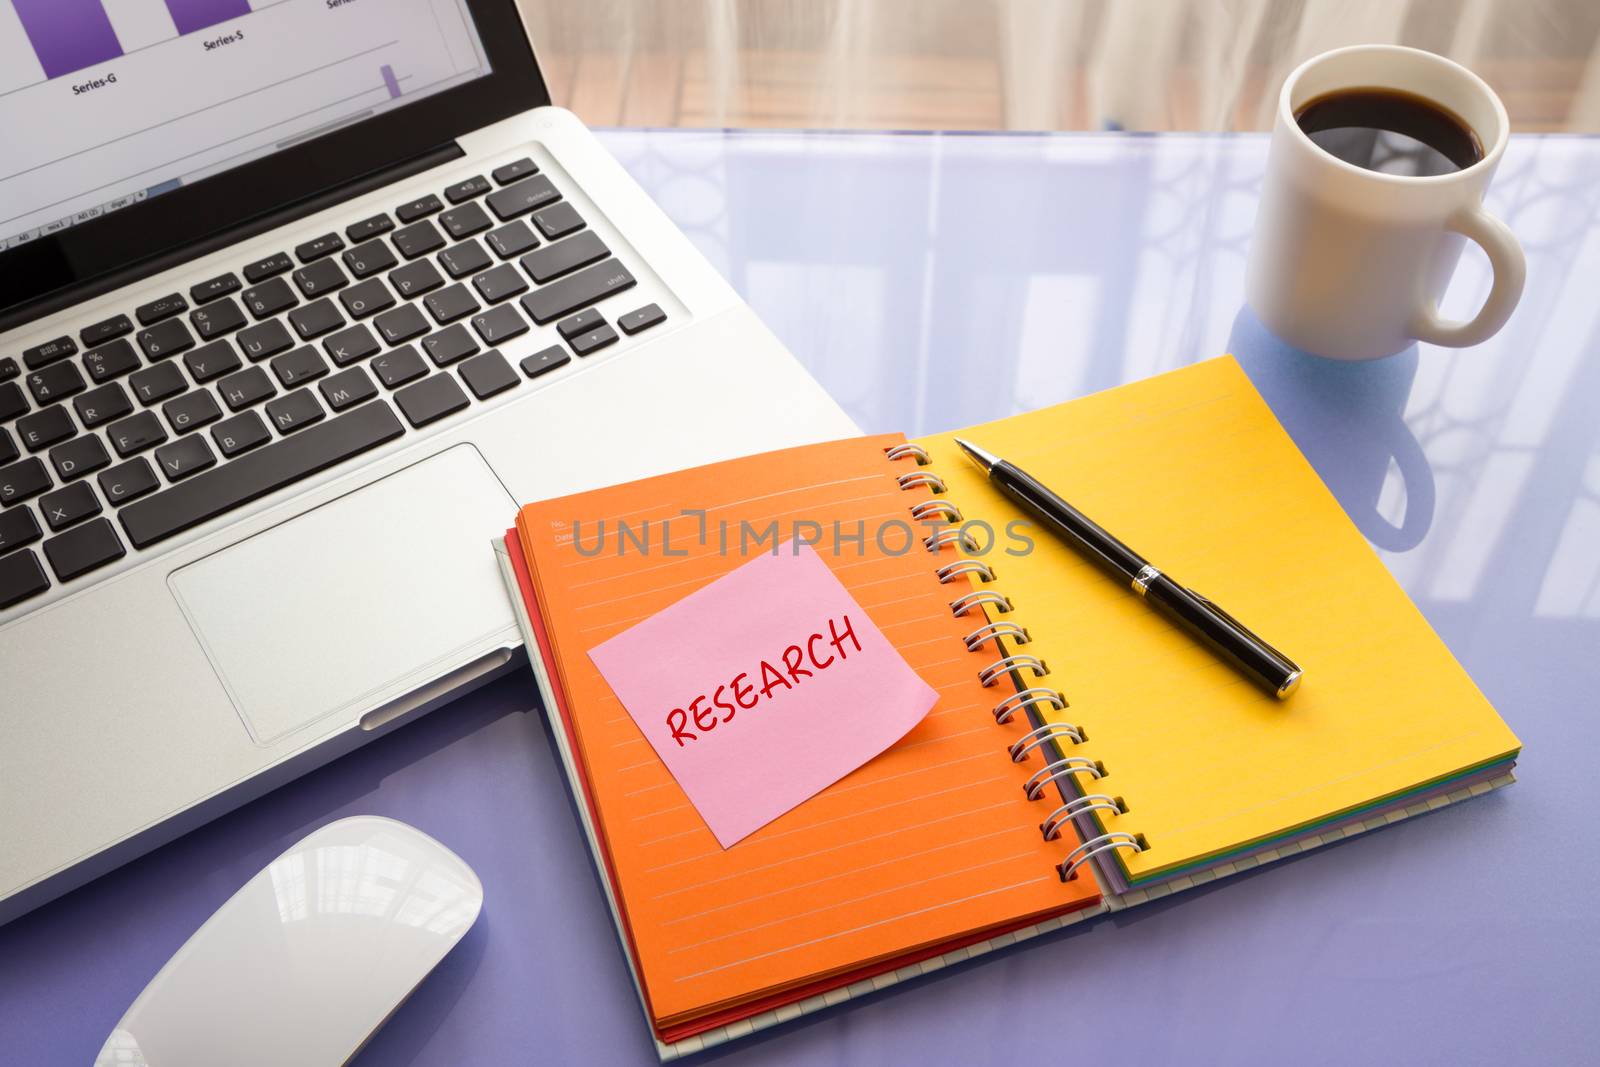 reminder note on paper with text RESEARCH 
stick on colorful book with laptop and a cup of coffee on glass table, top view image